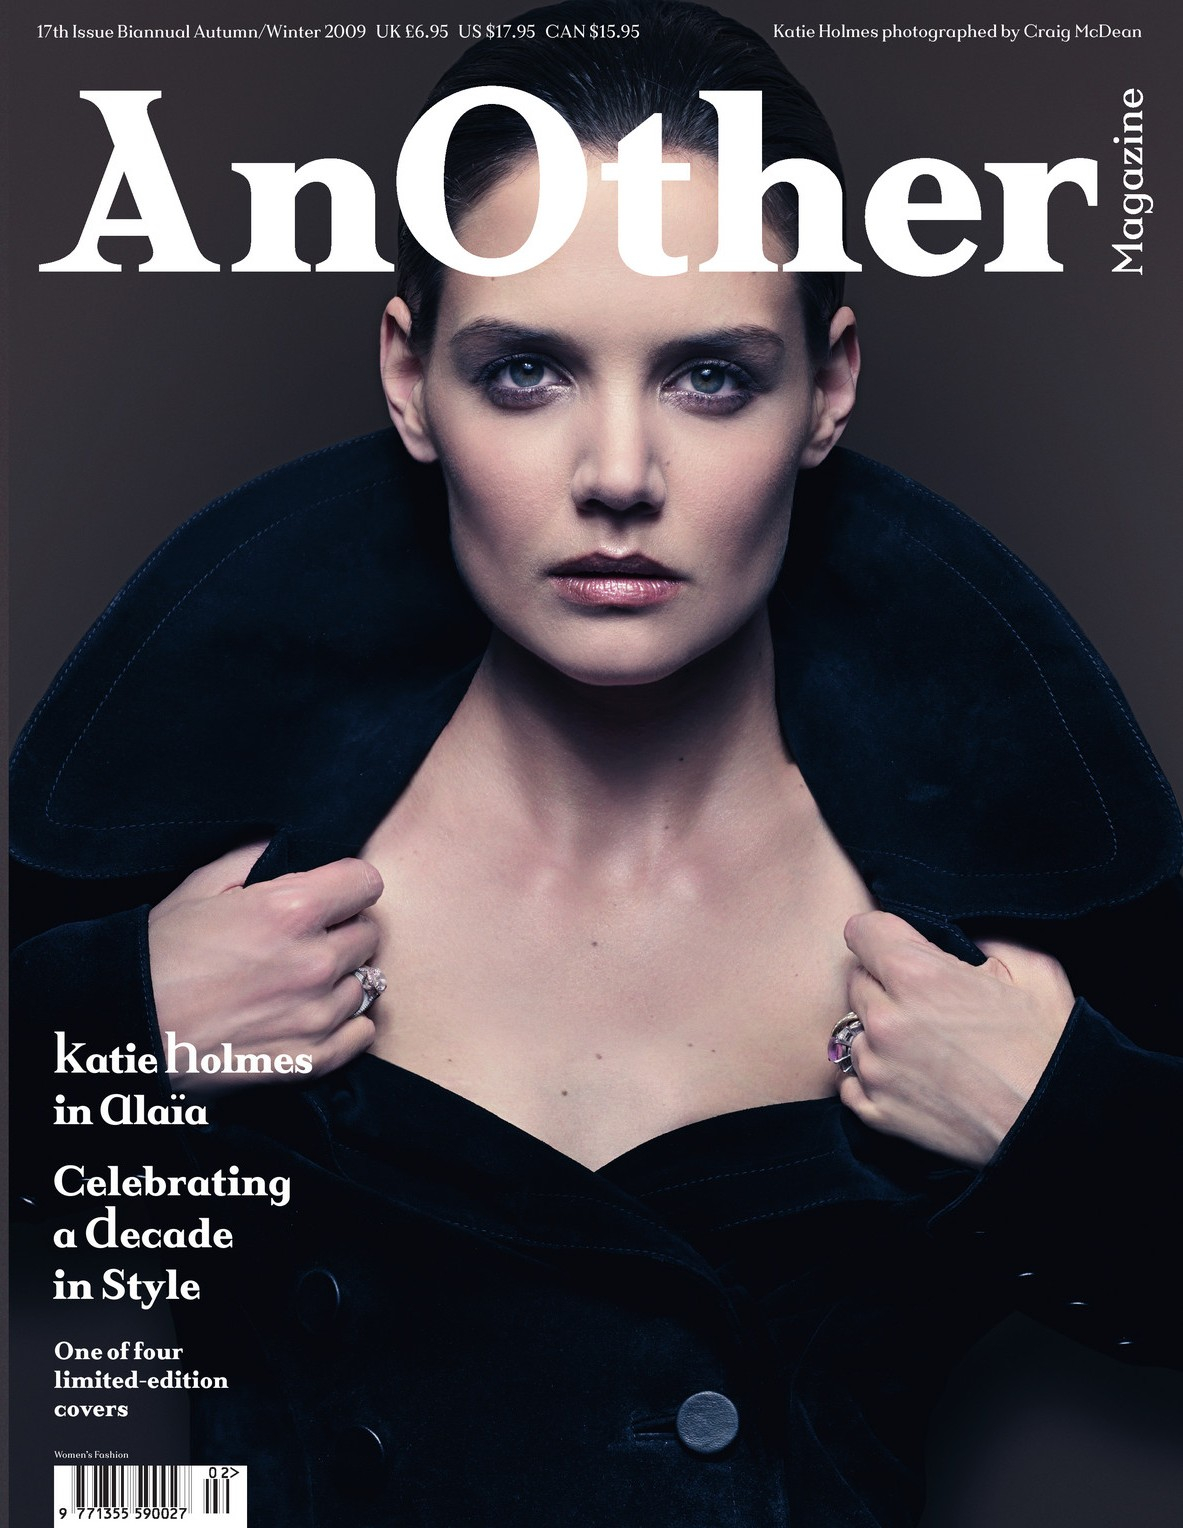 PANOS Another cover AW09 KATIE HOLMES.jpg